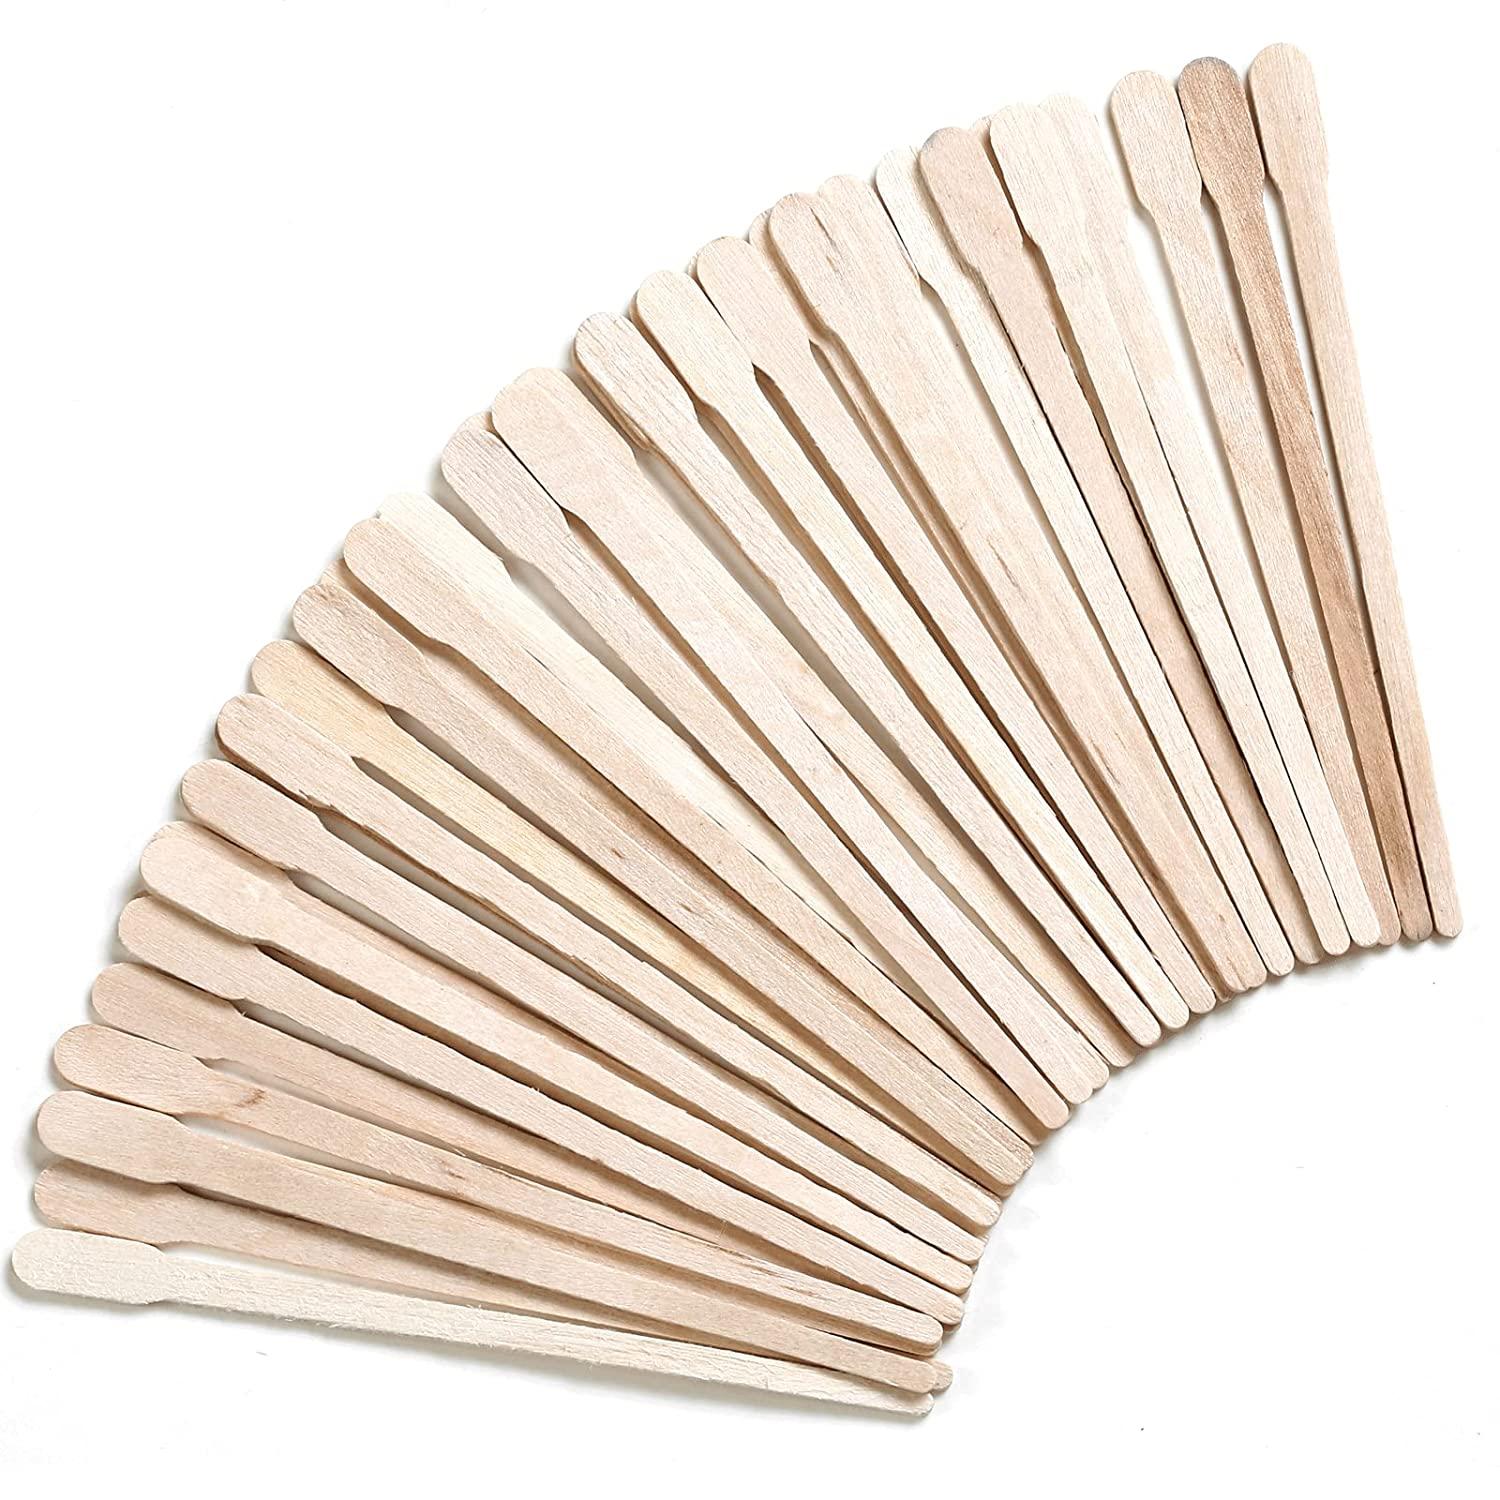 DecBlue 300 Pcs Wooden Wax Sticks 4 Styles Wood Waxing Spatulas Applicators Hair Removal S M L Sizes for Body Legs Facial or Wood Craft Sticks